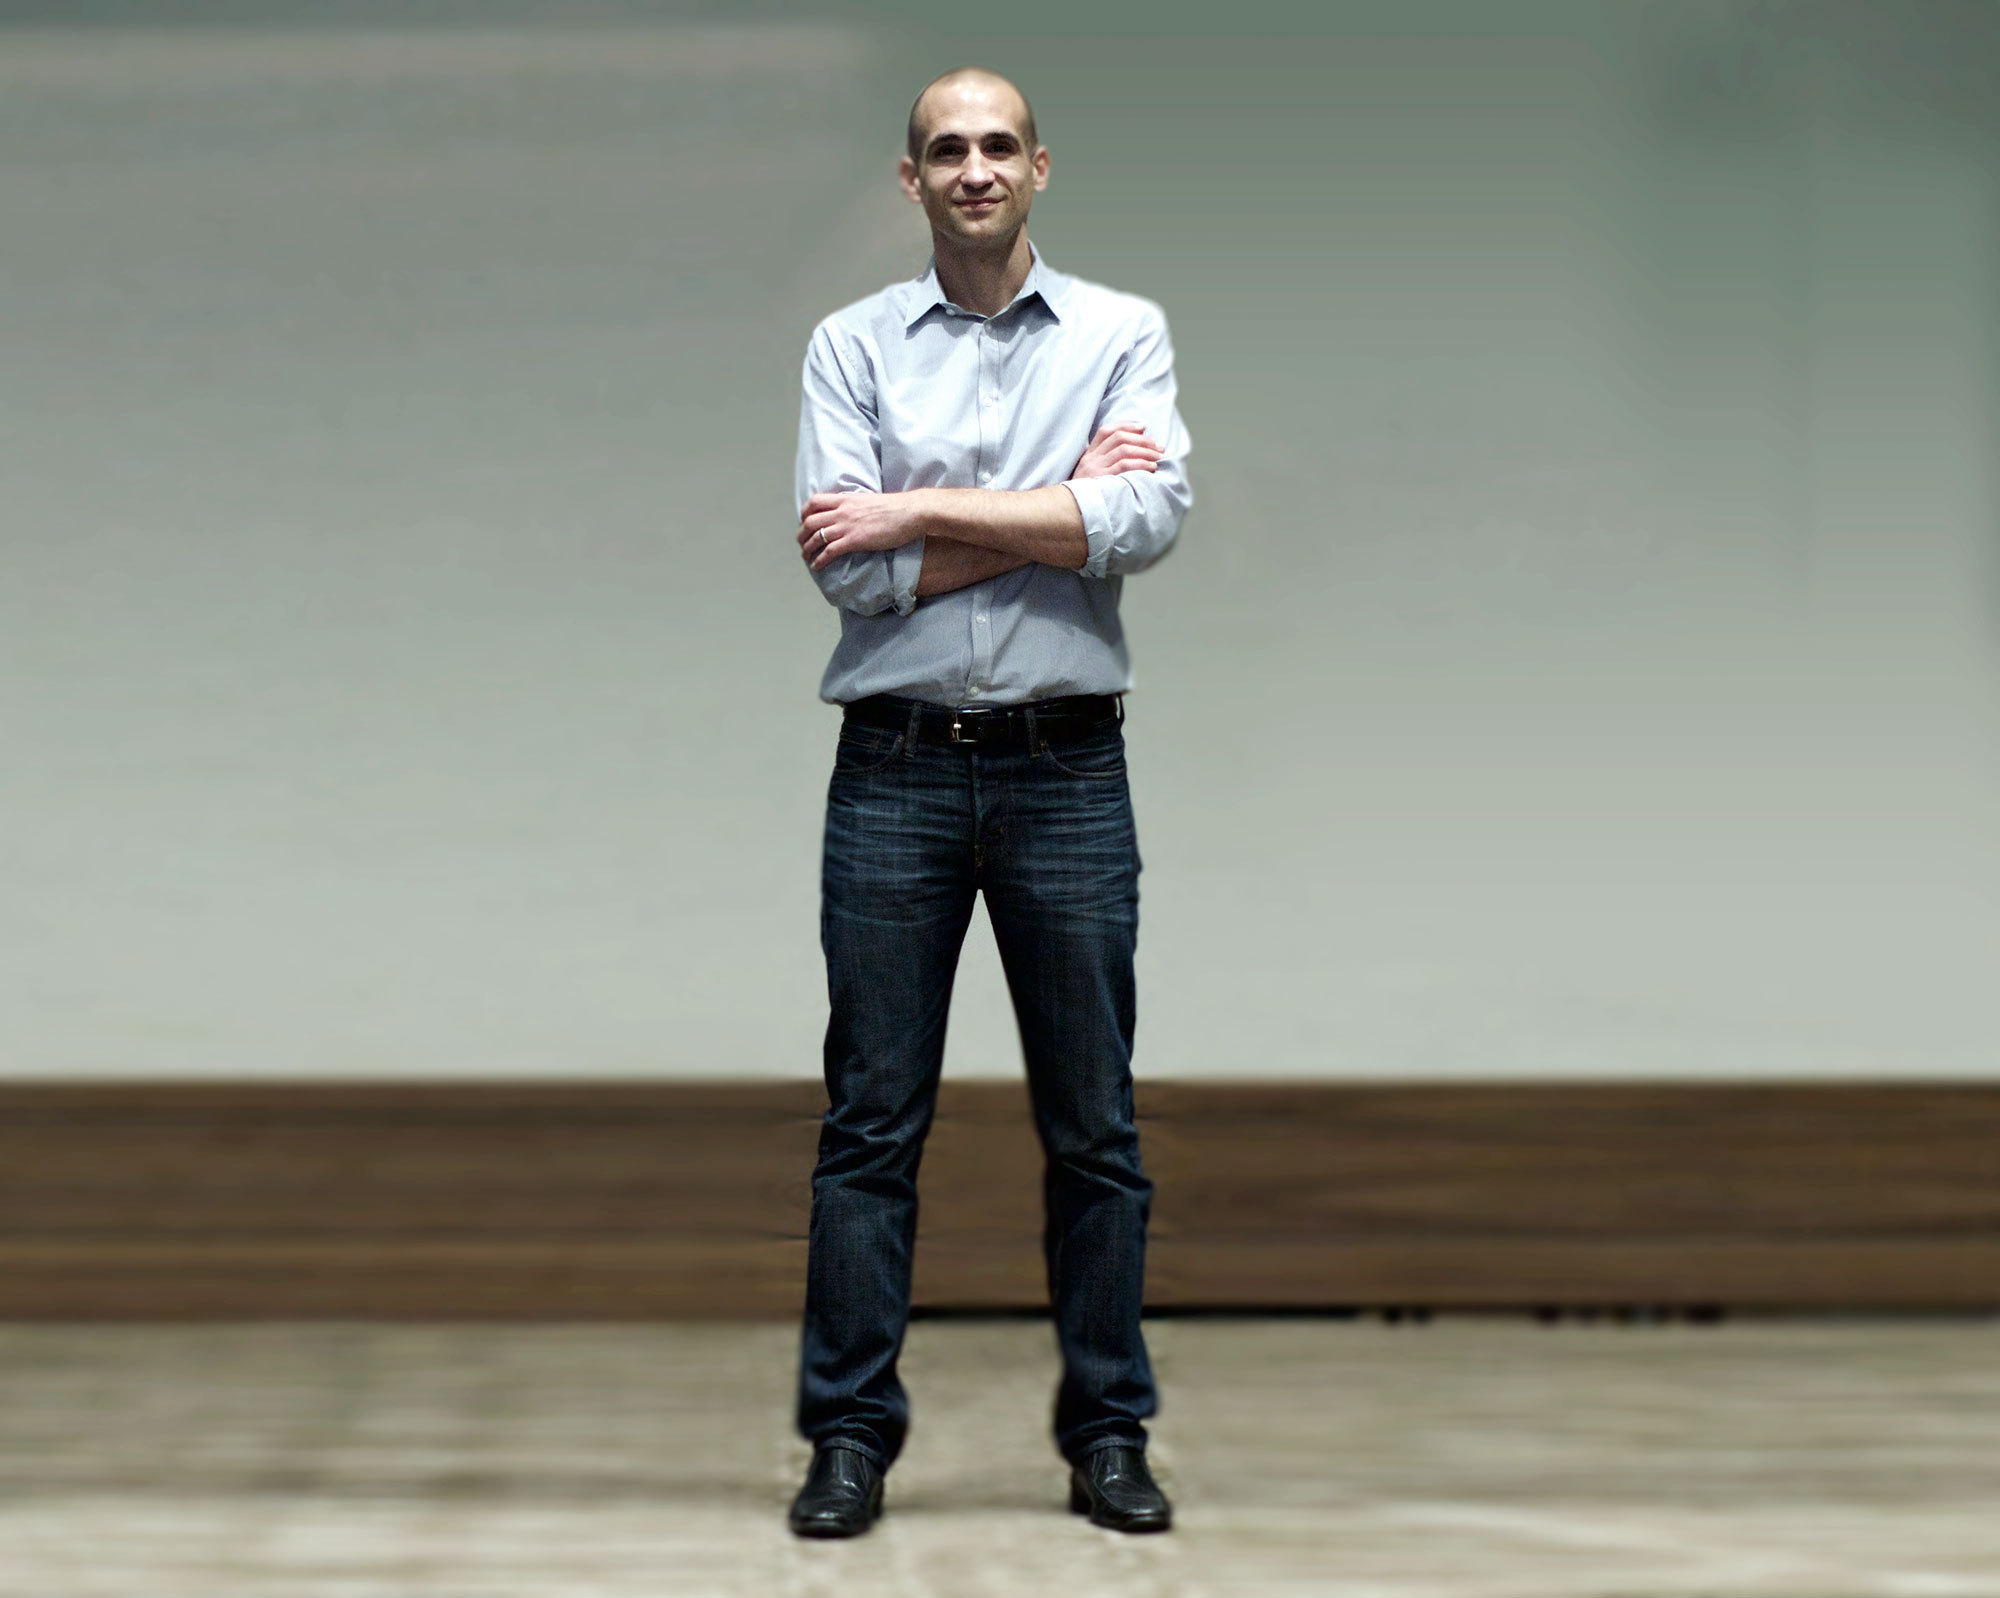 Nir Eyal. Author of Hooked: How to Build Habit-Forming Products